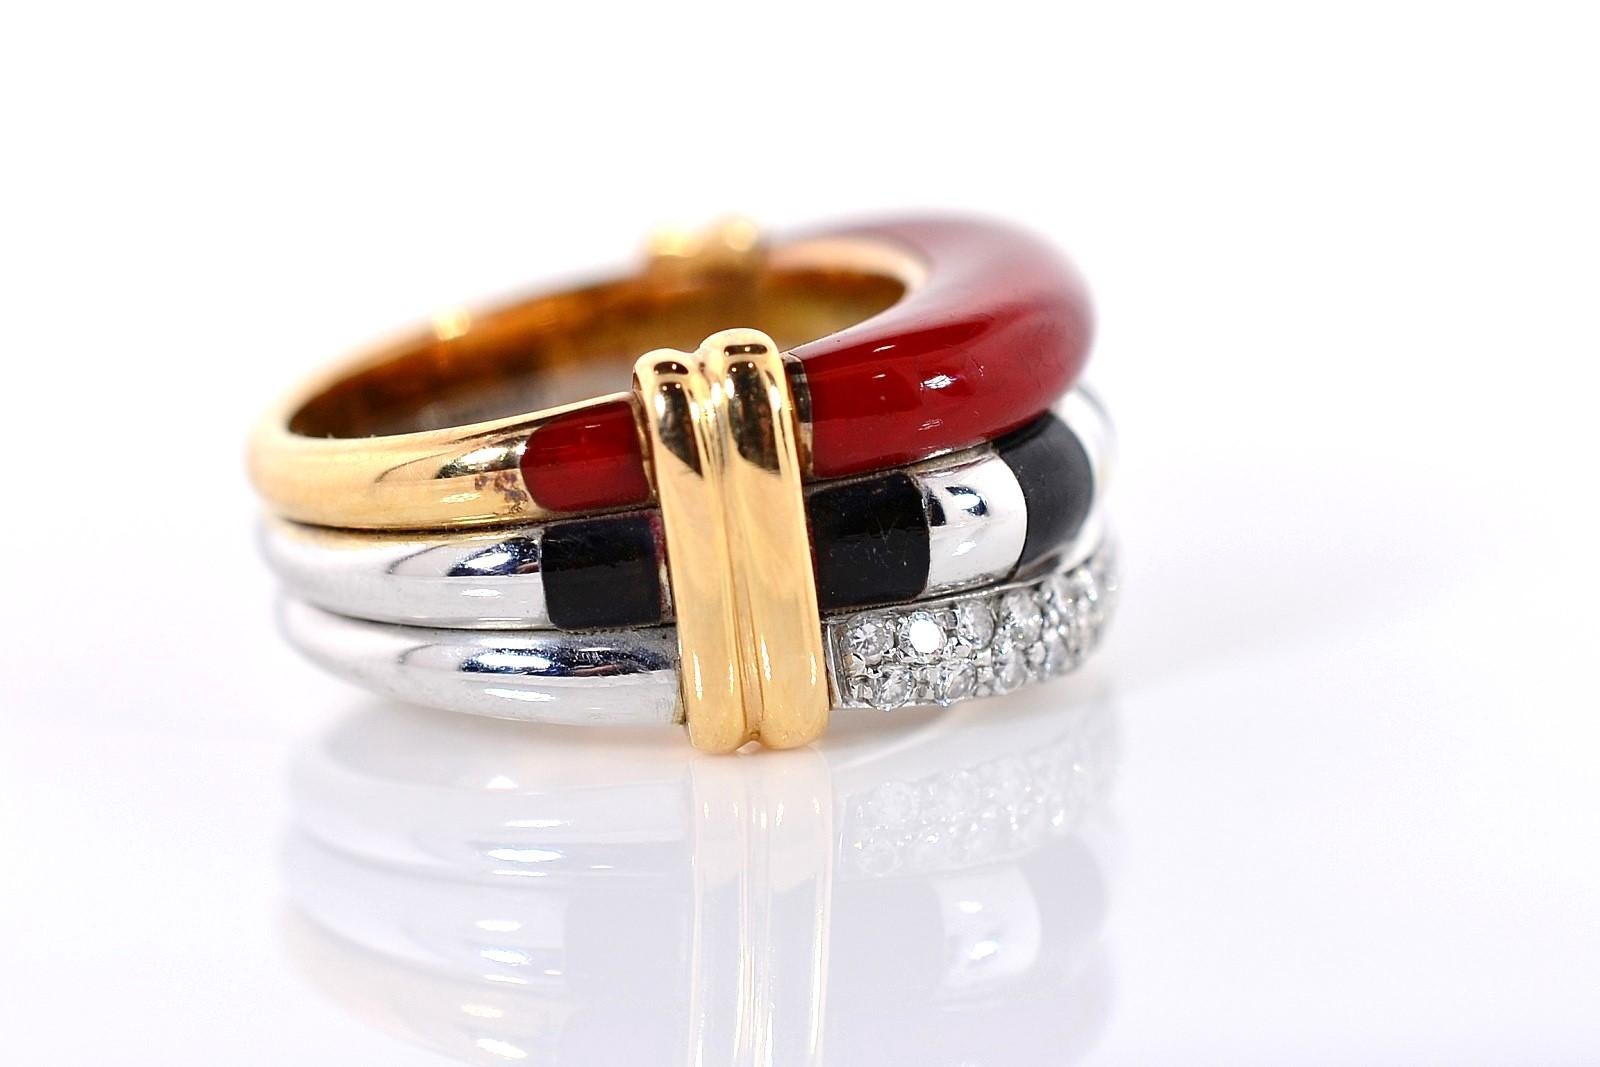 Substantially crafted of 18KT yellow/white gold, this well made ring features extremely sturdy Red & Black Enamel.  The three band design has one band of pave diamonds all weighing 0.50 carat.  Yellow gold banding accents the shoulders of this